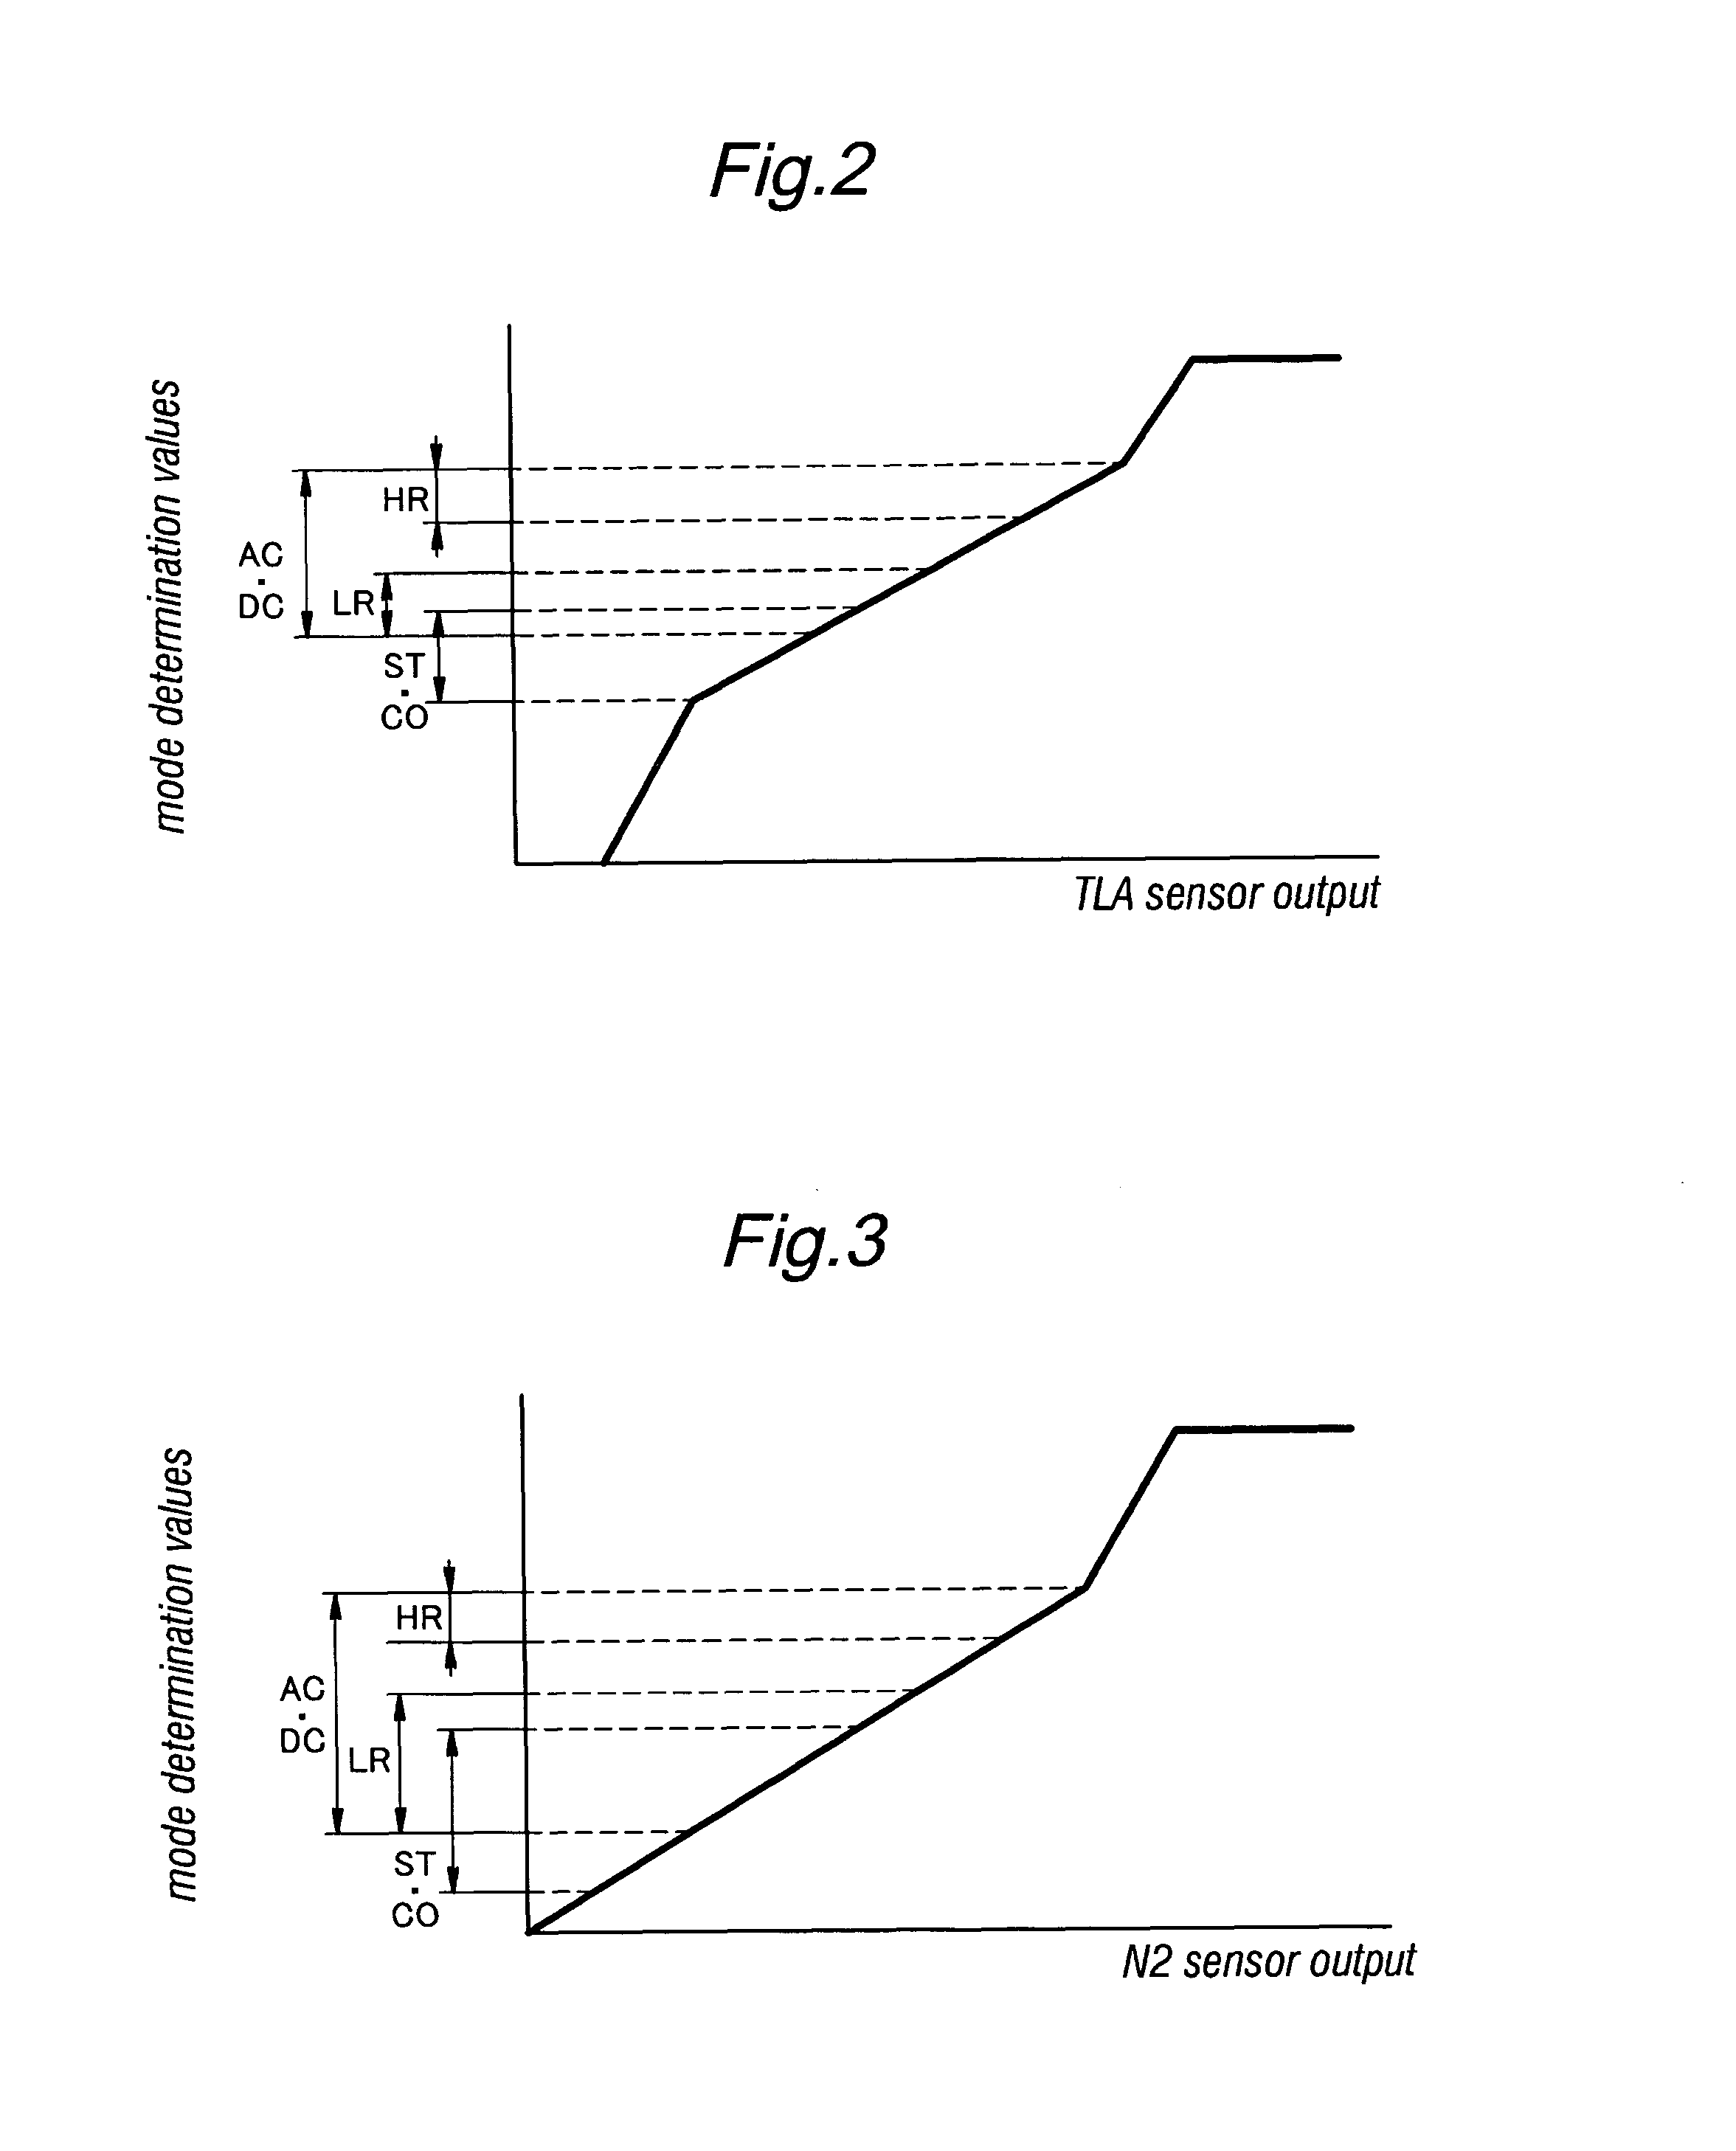 System for monitoring sensor outputs of a gas turbine engine